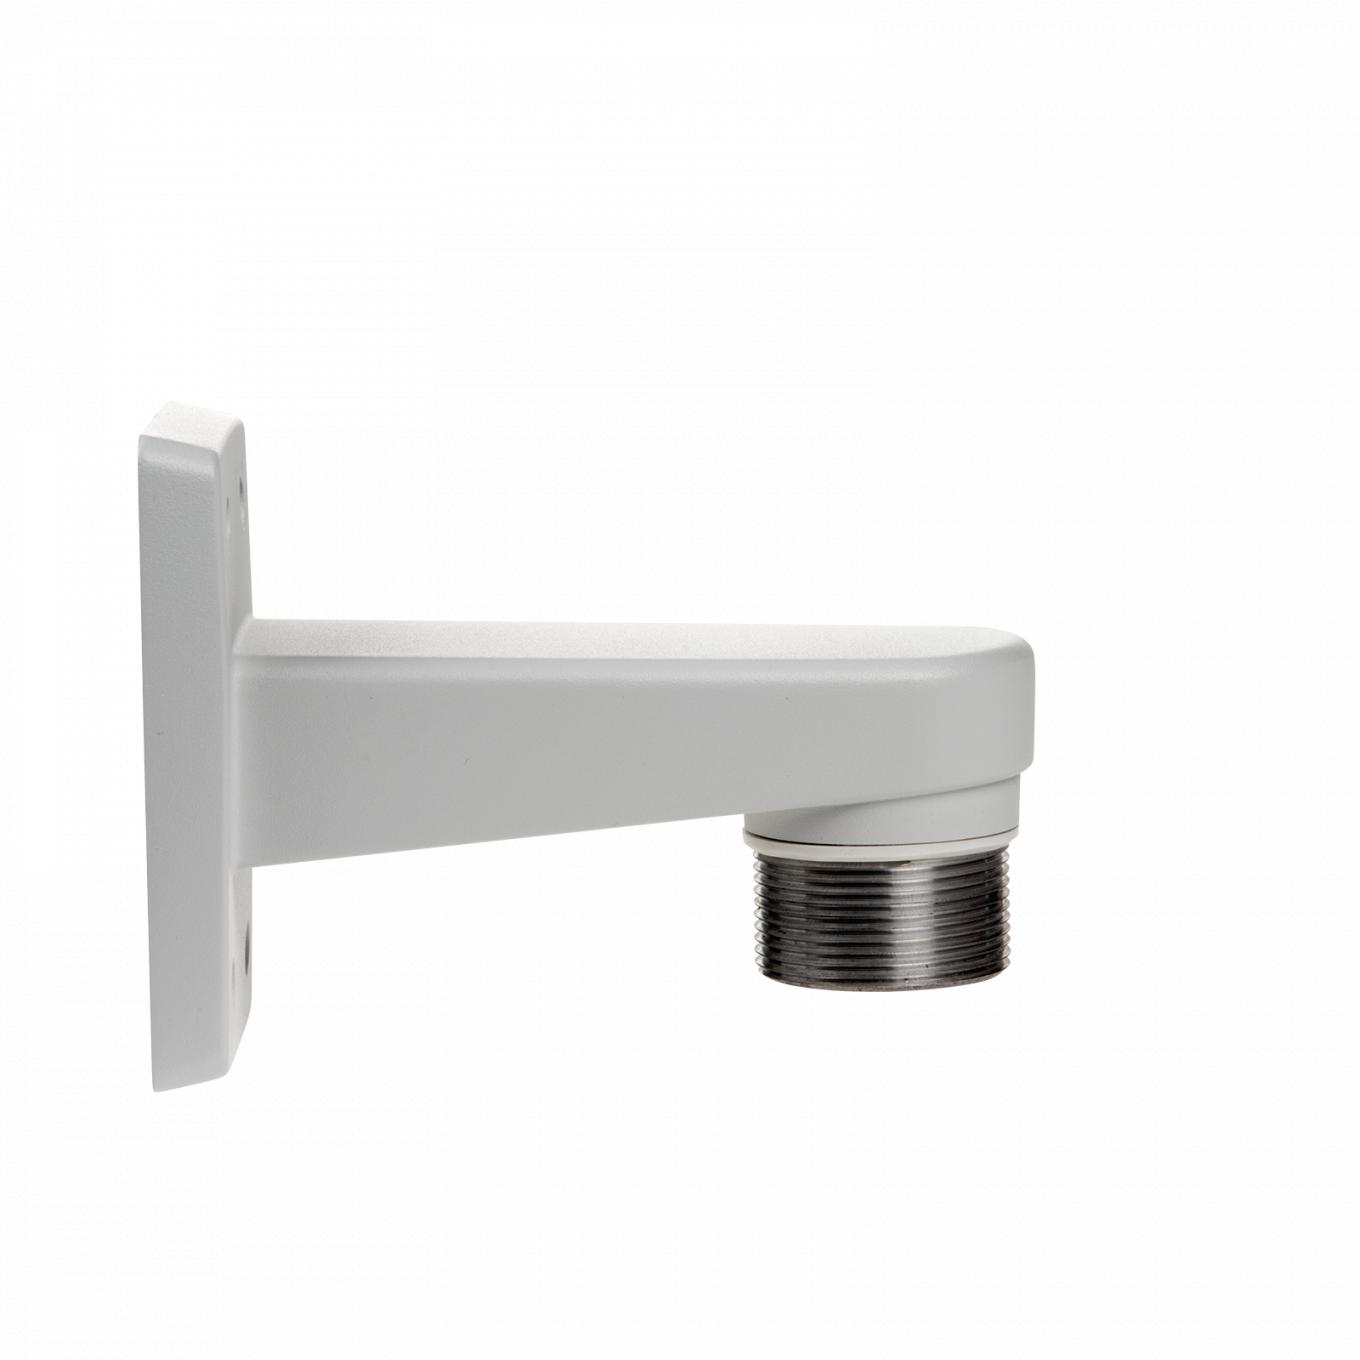 AXIS T91E61 wall mount in profile from the right angle